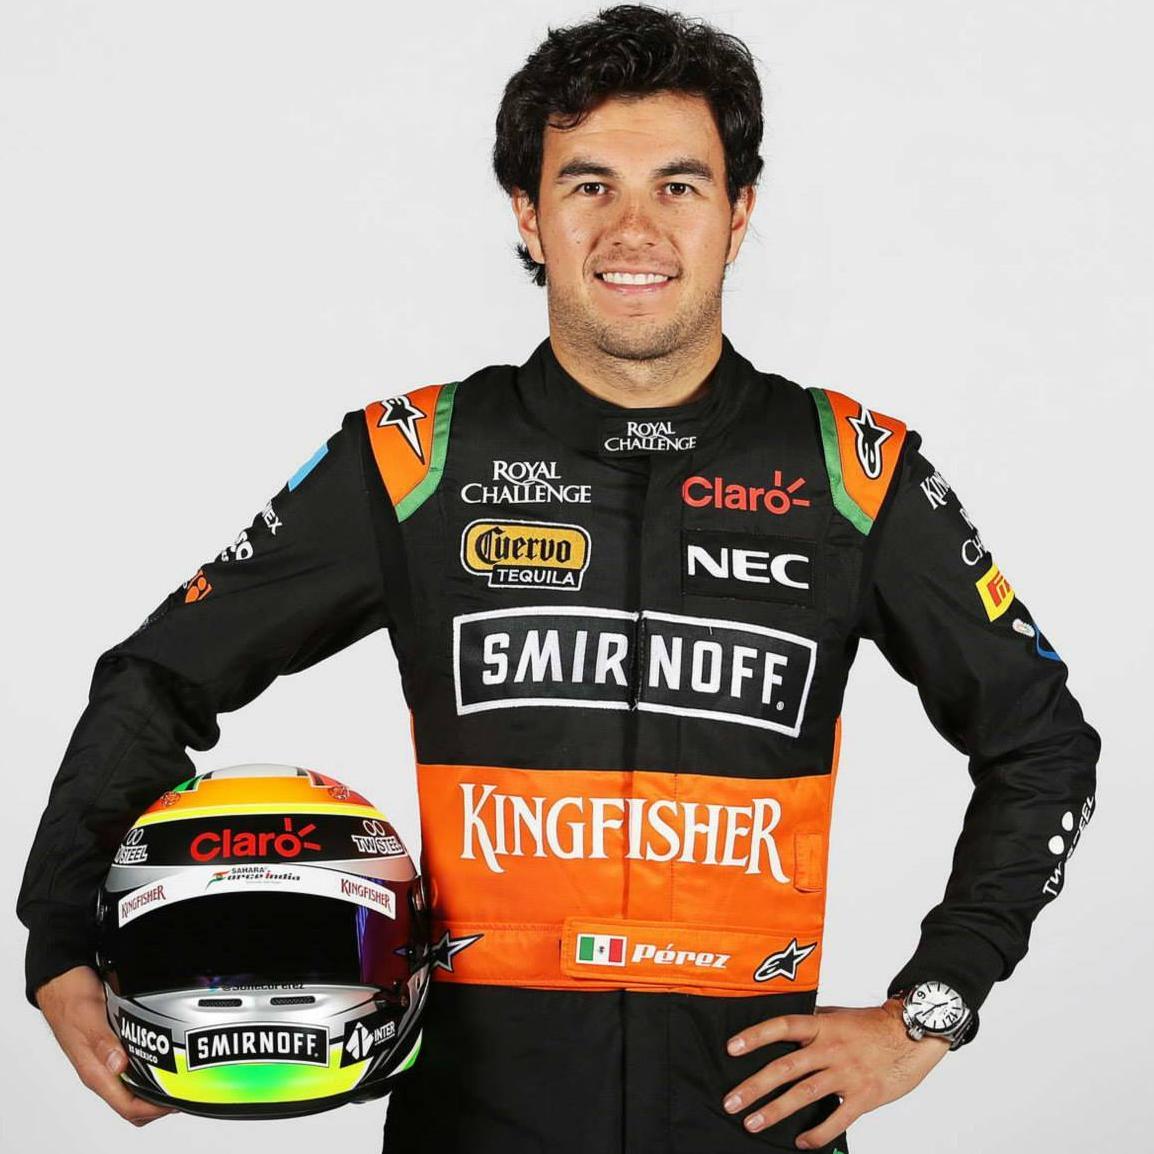 The first hungarian fan page of a talented mexican Formula One driver. Tribute to a fantastic Sergio Checo Perez! FOLLOW!